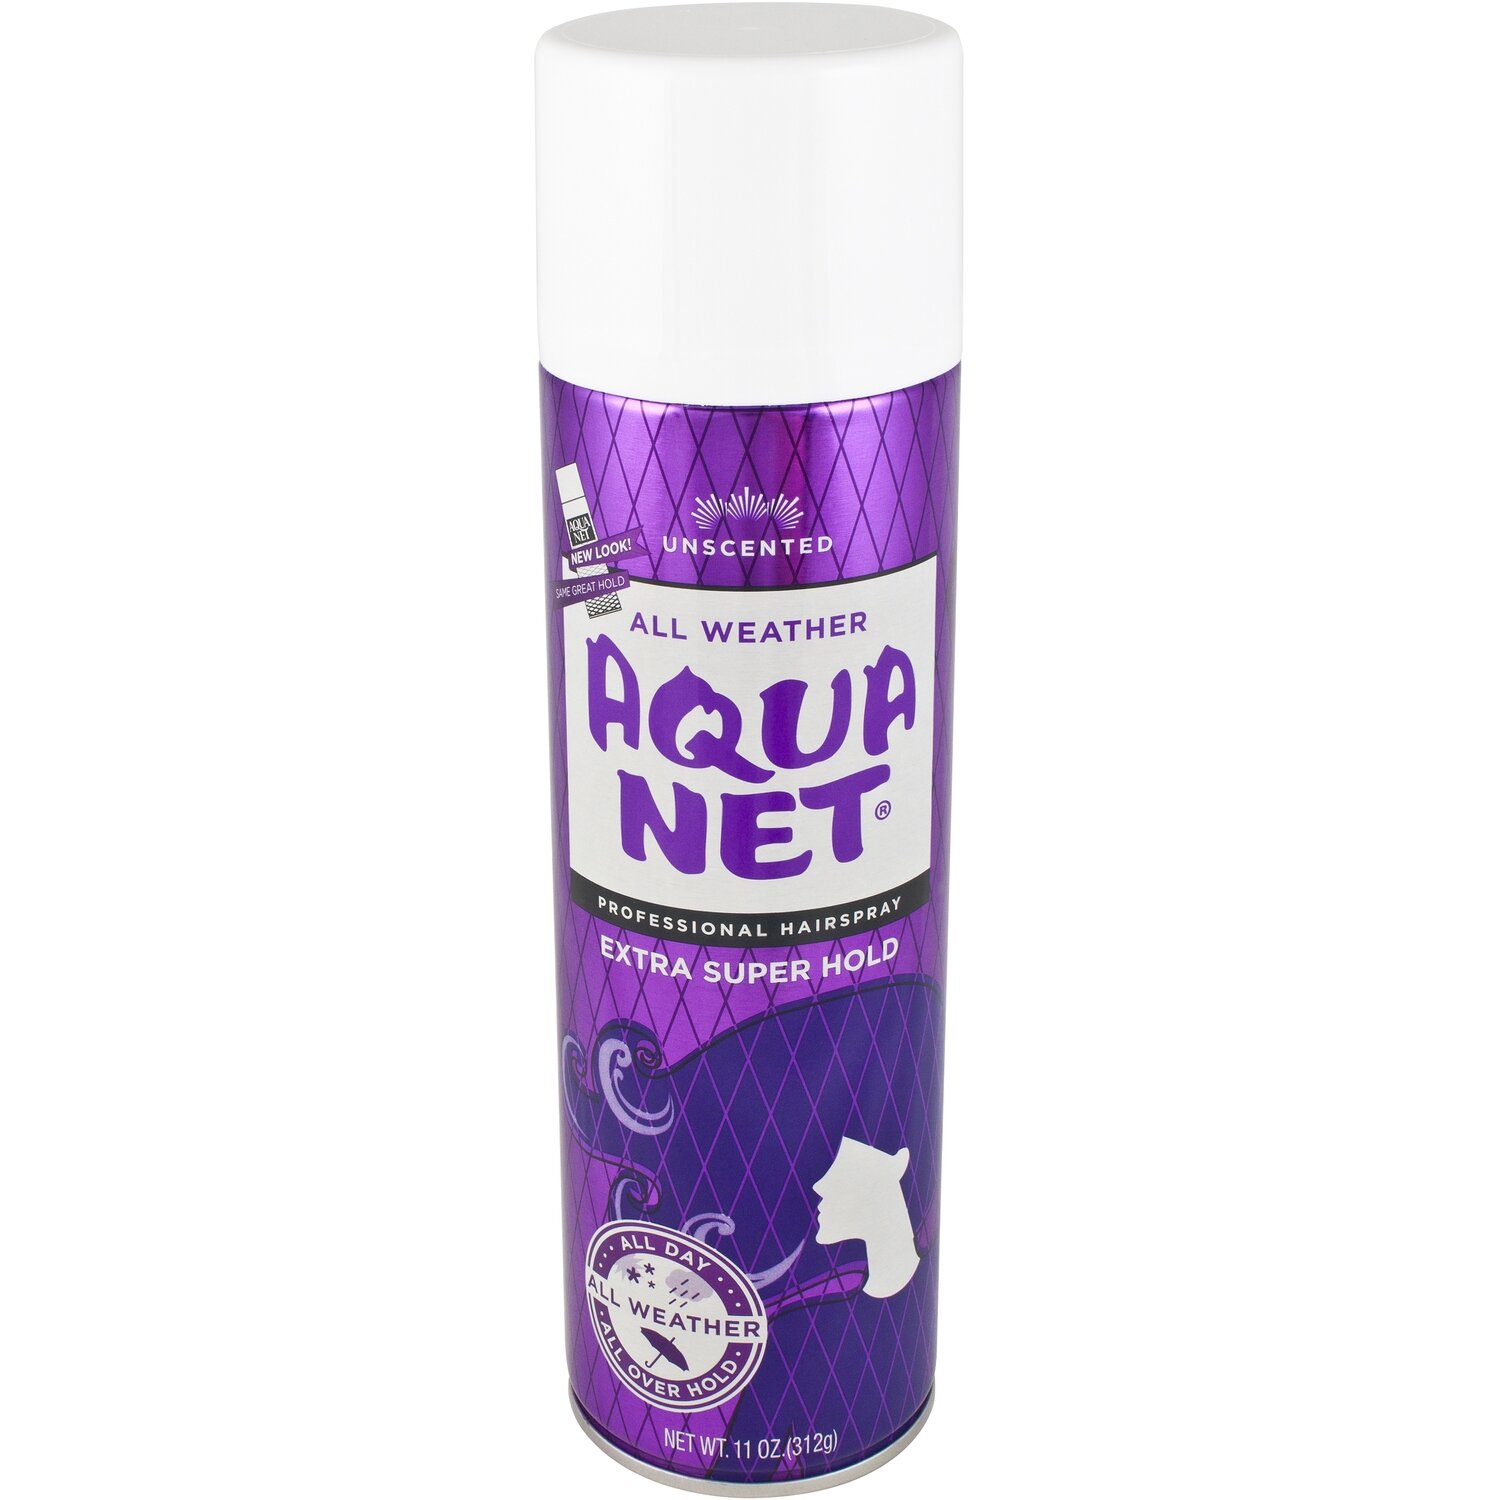 Aqua Net All Weather Extra Super Hold Professional Hairspray Unscented